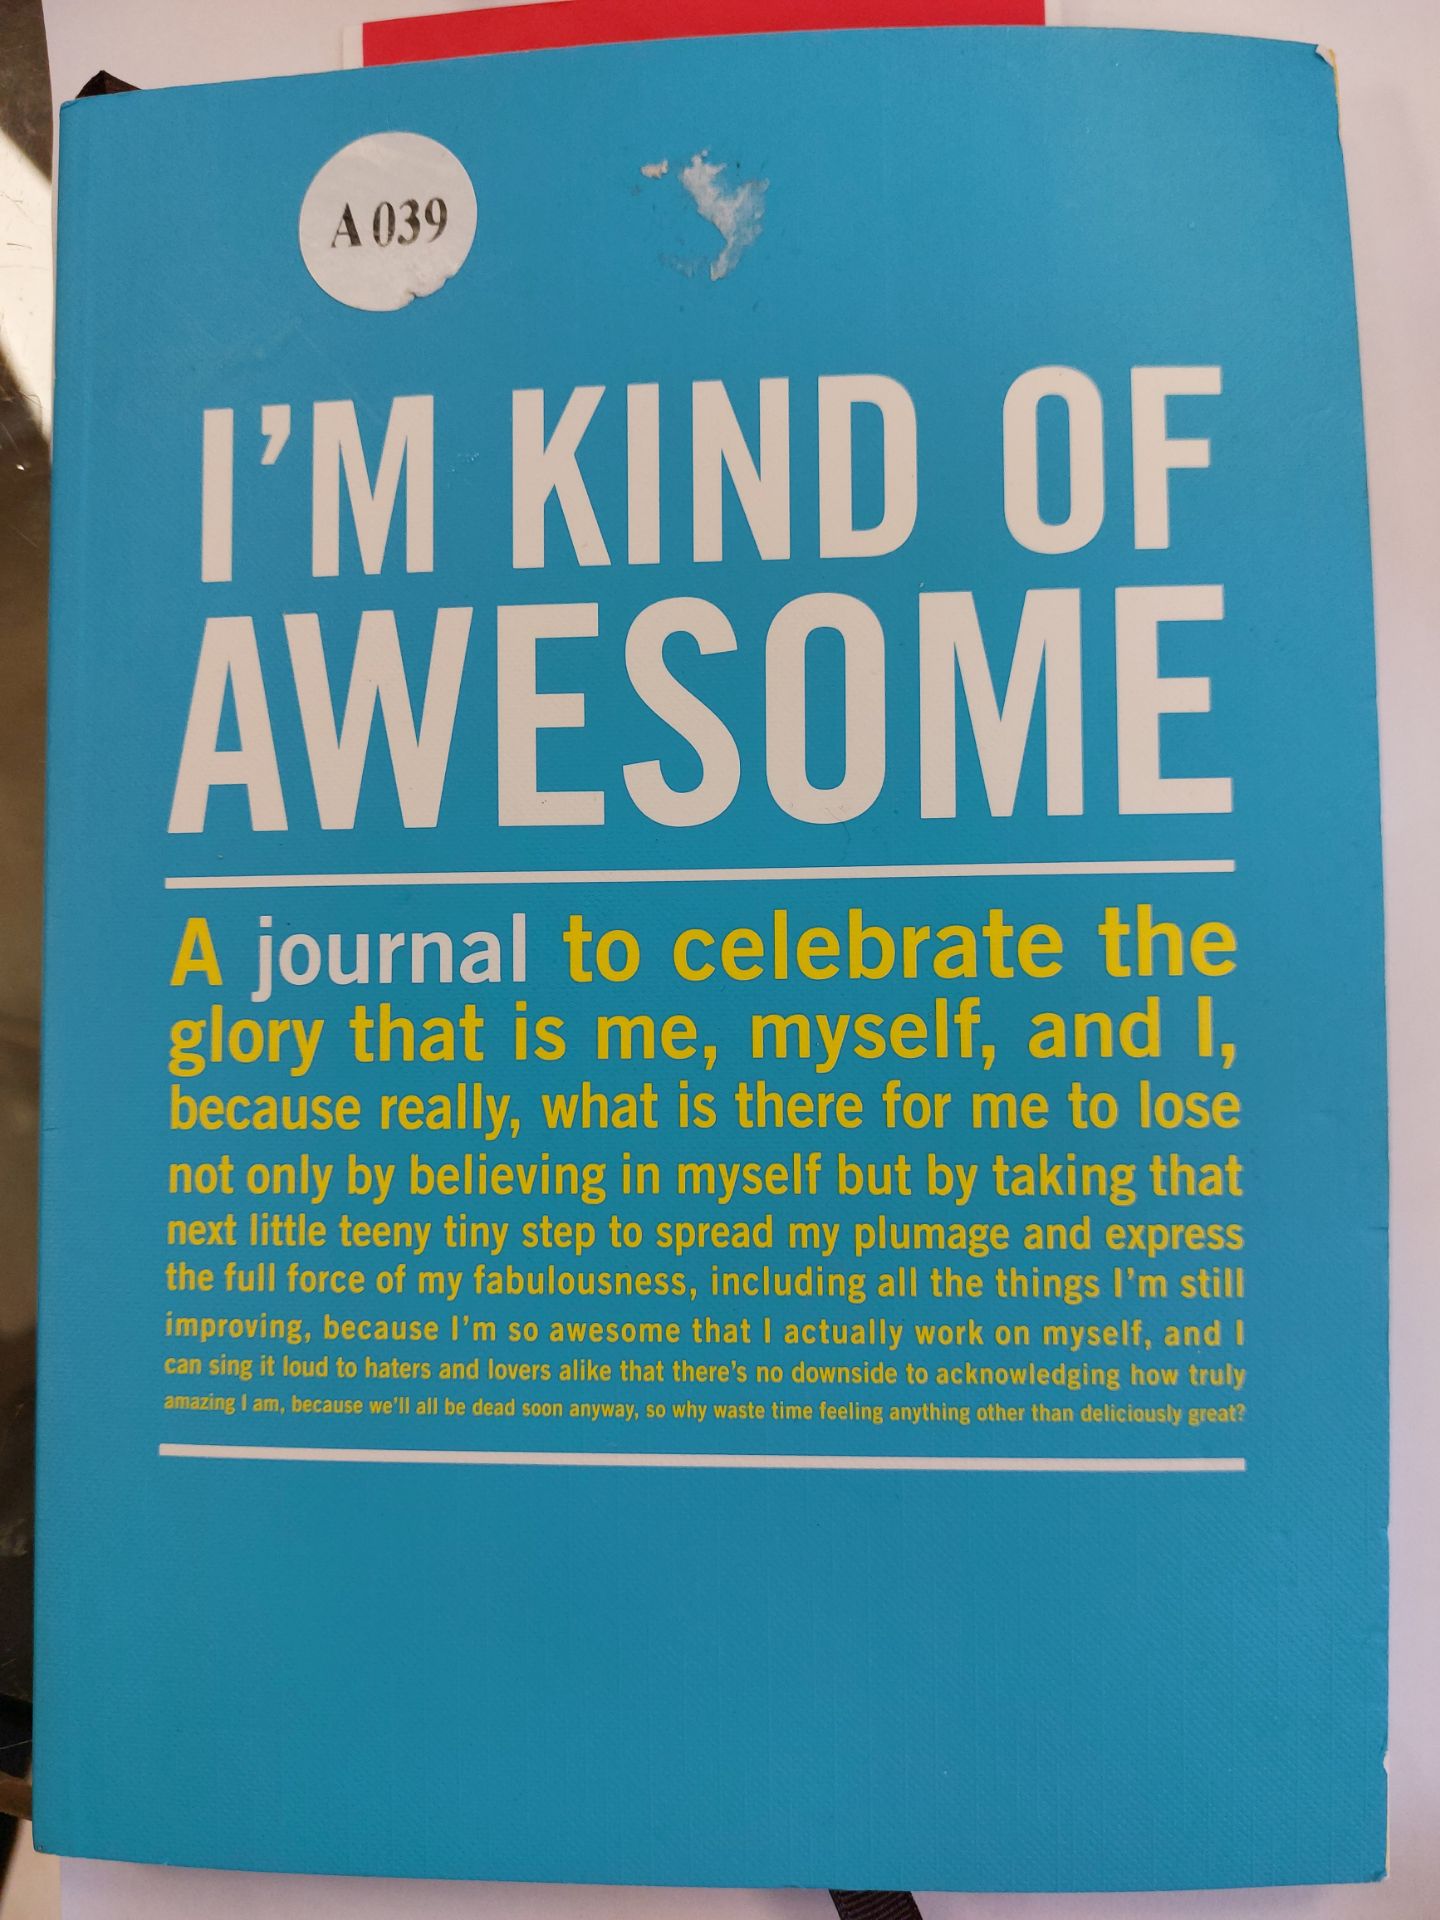 Journals - Awesome - Image 3 of 4